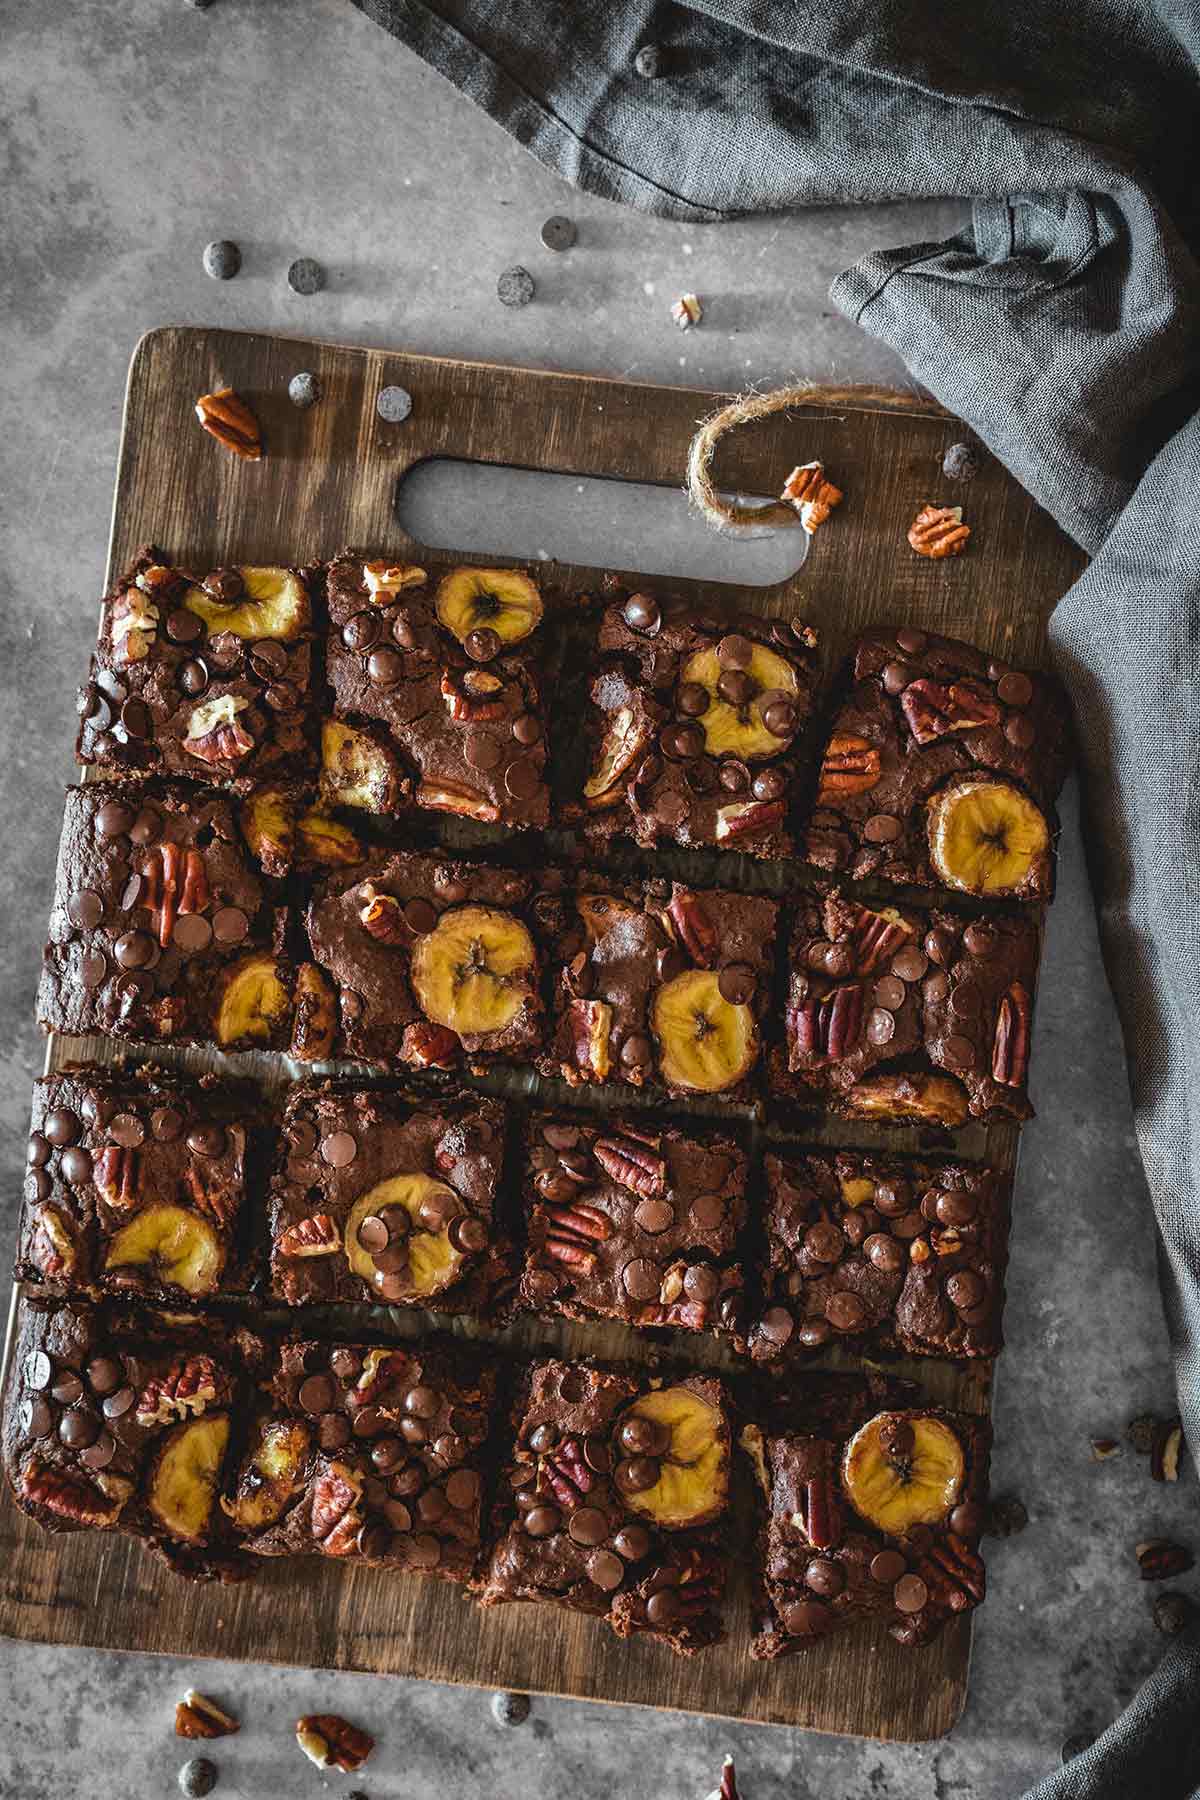 Healthy chocolate lentil brownies with pecans and banana